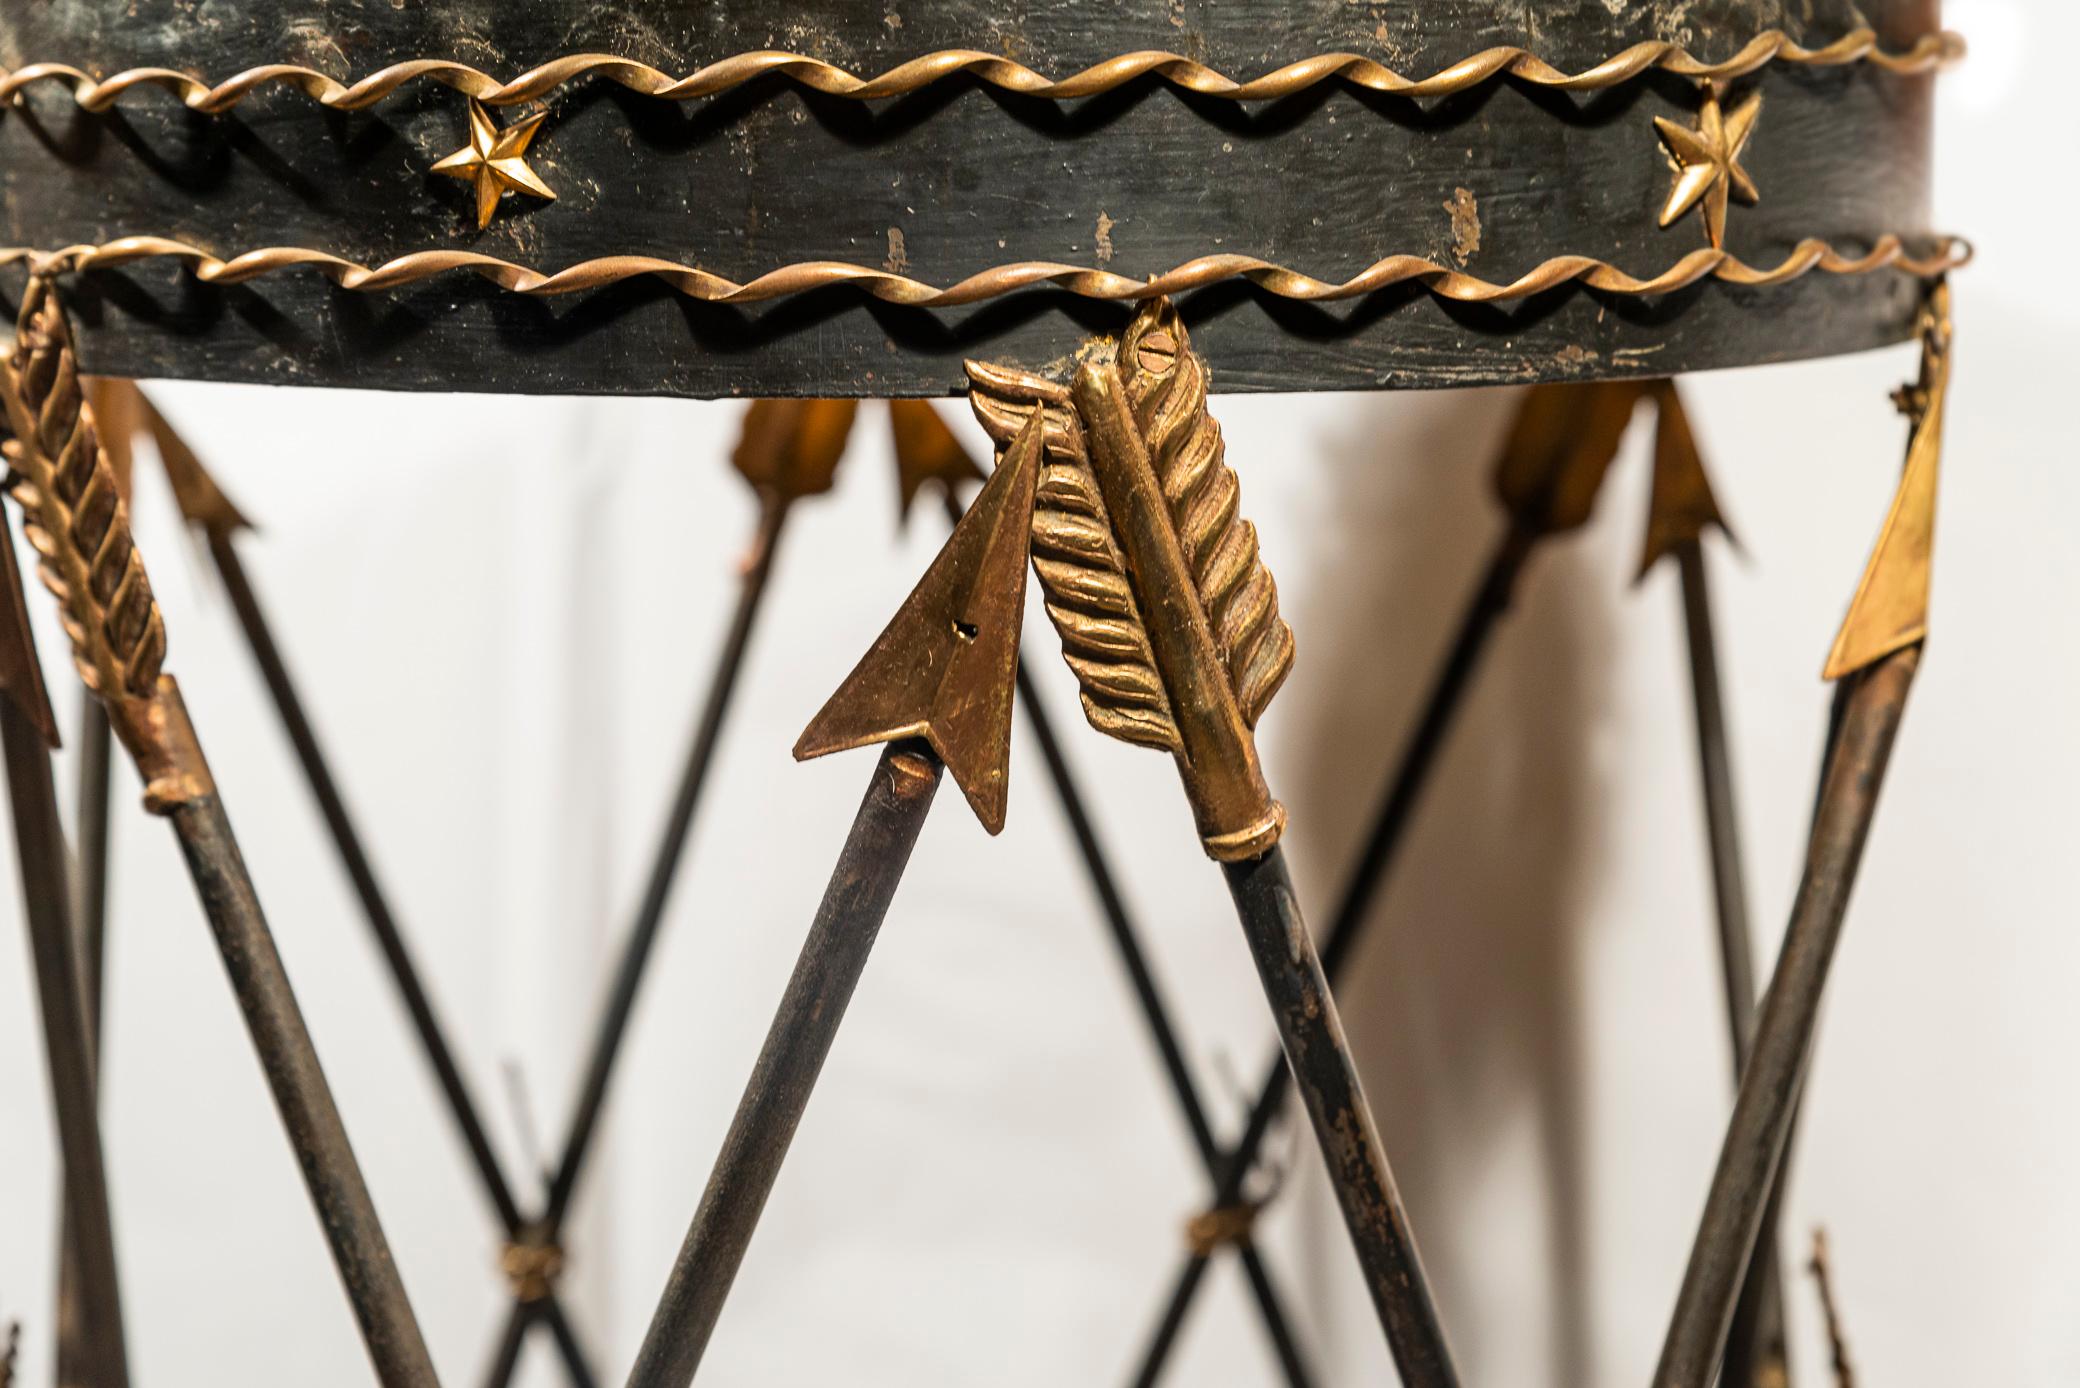 Maison Jansen,
Side table decorated with arrows and friezes of stars
Marble, iron and golden brass 
circa 1970, France.

Measures: Diameter 41 cm, height 62 cm.

Maison Jansen is an interior design house located in Paris. 
It was founded in 1880 by